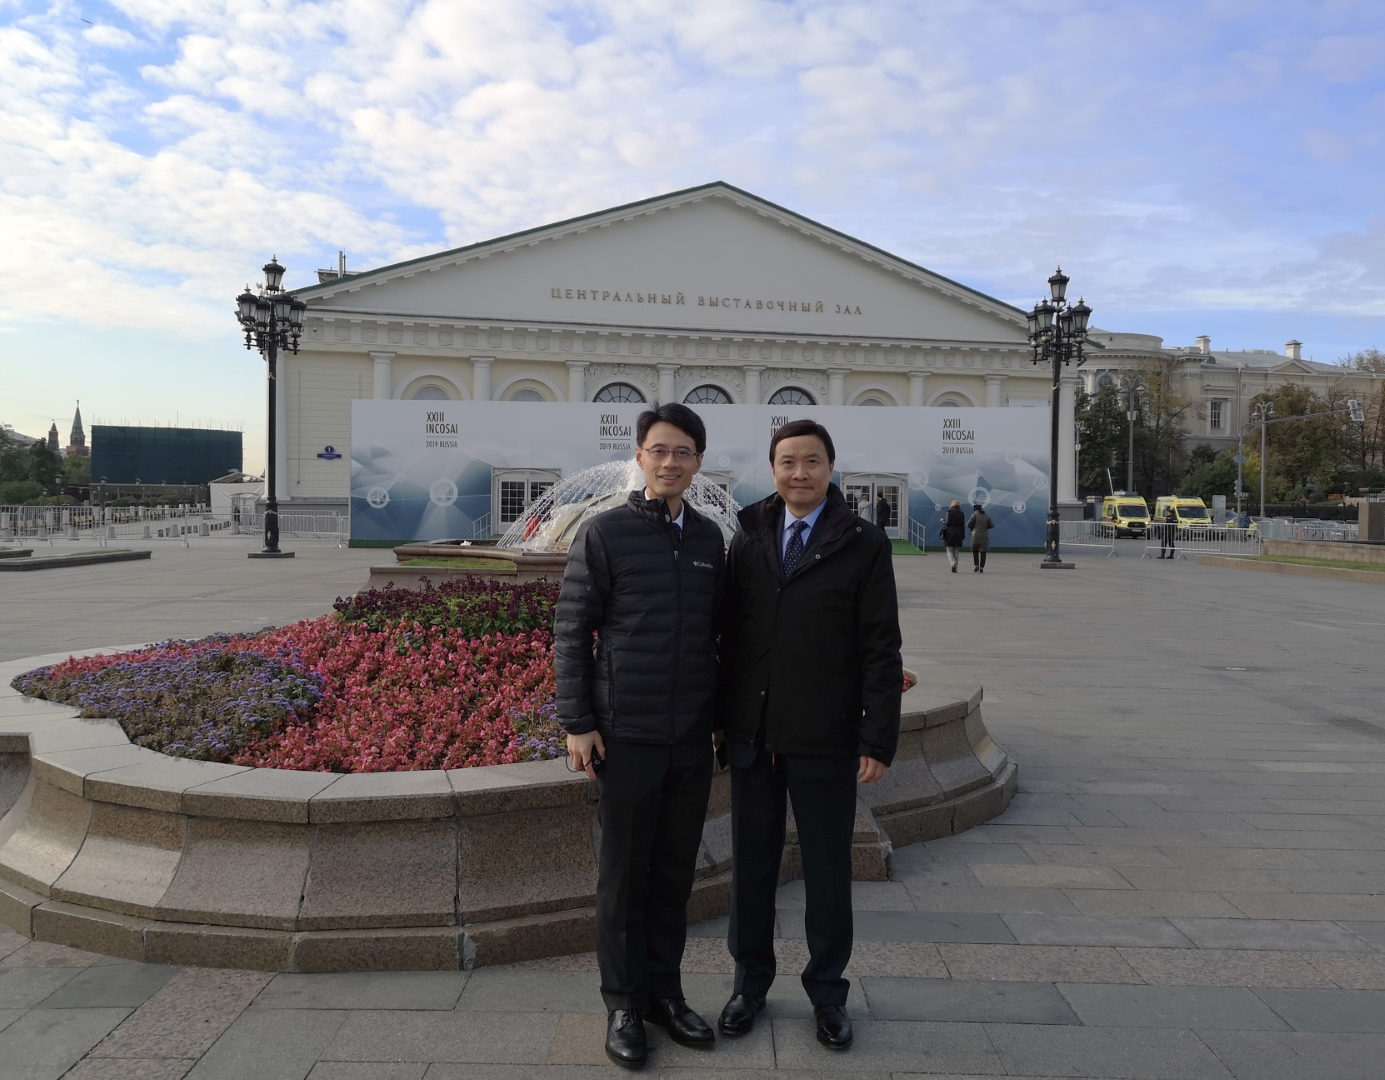 John Chu, Director of Audit and Allan Wong, Senior Auditor at the conference venue